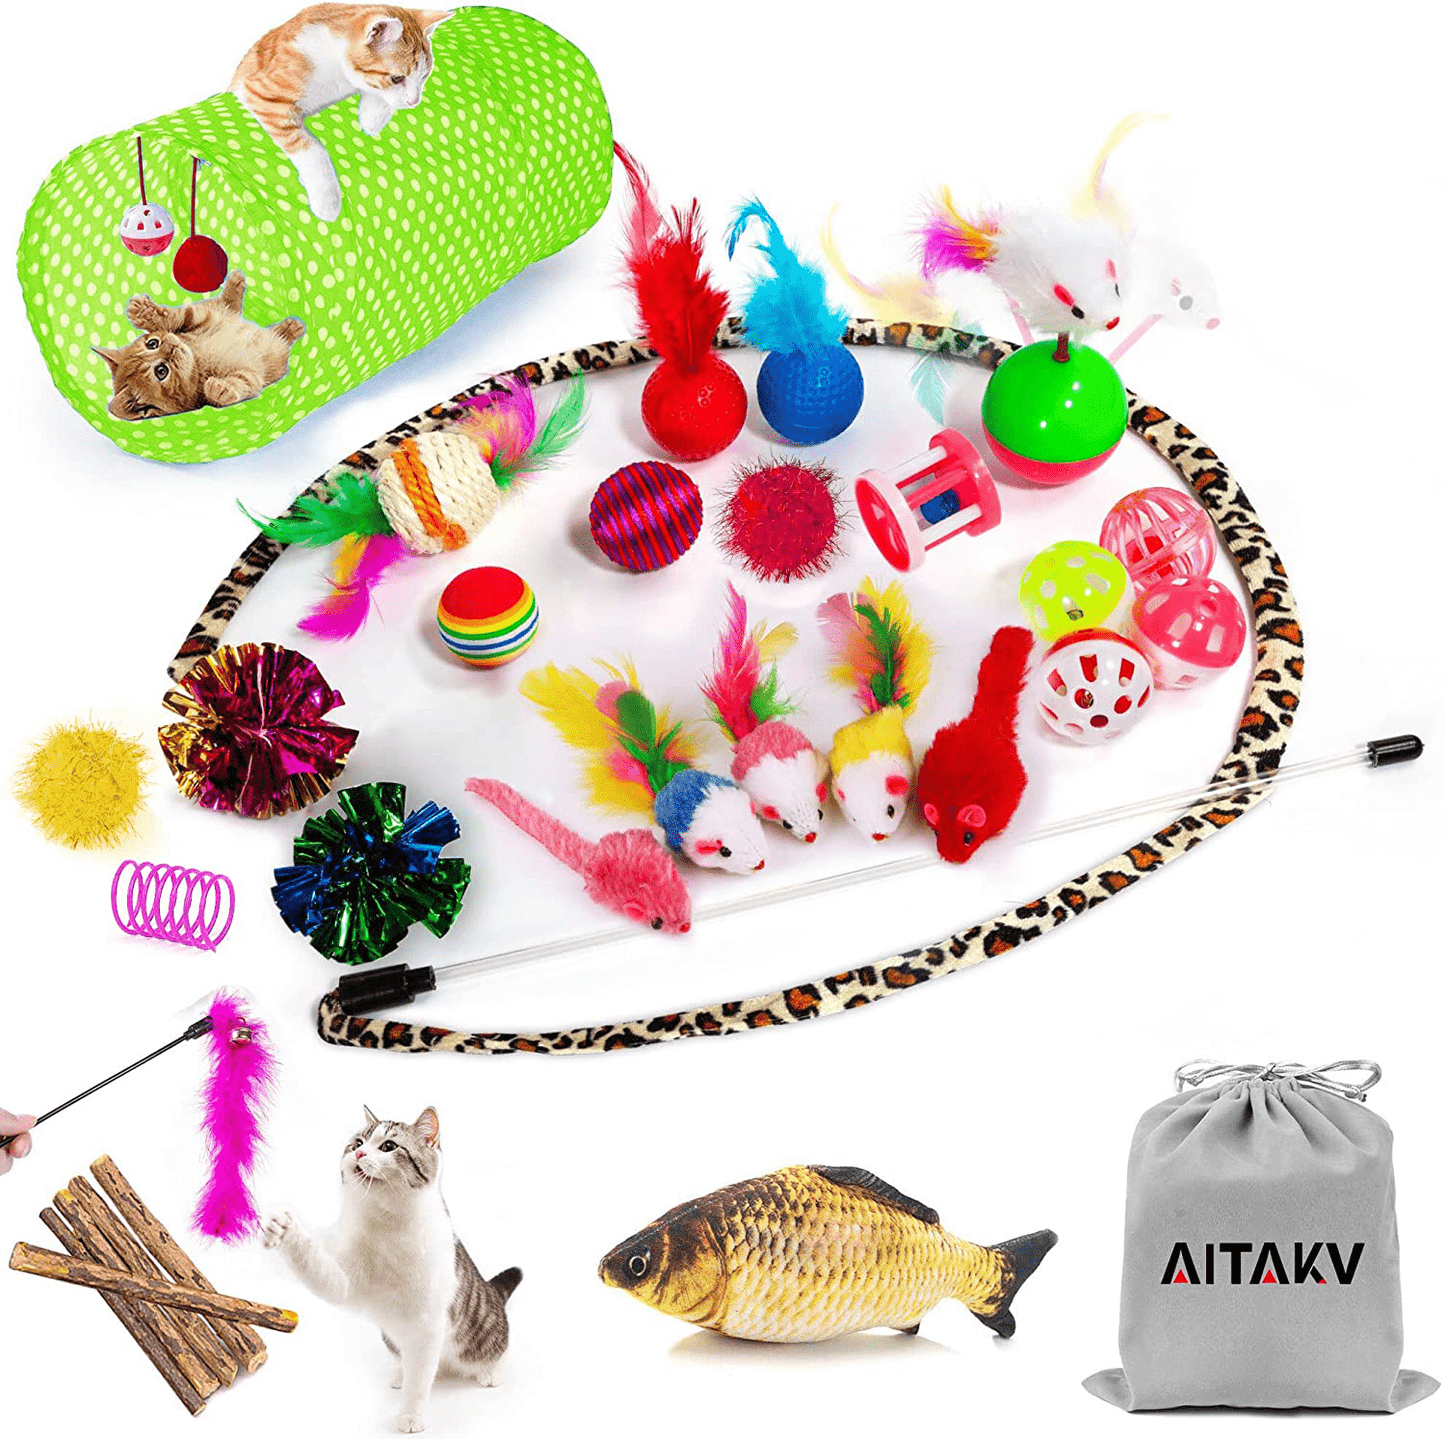 31 PCS Cat Toys Kitten Toys Assortments,Variety Catnip Toy Set Including 2 Way Tunnel,Cat Feather Teaser,Catnip Fish,Mice,Colorful Balls and Bells for Cat,Puppy,Kitty Animals & Pet Supplies > Pet Supplies > Cat Supplies > Cat Toys AILUKI Green  